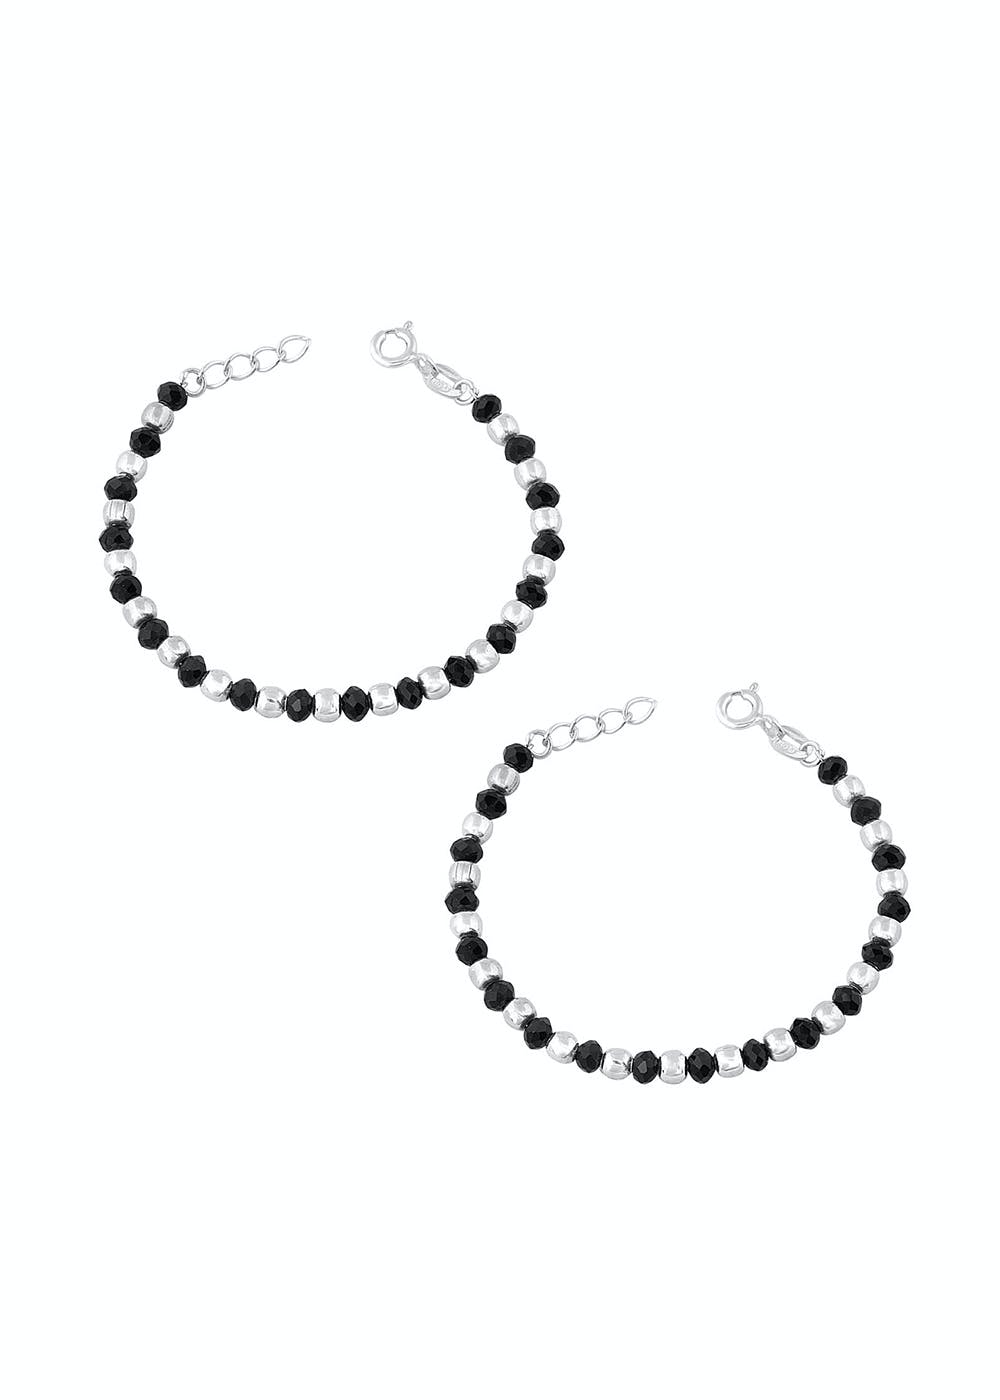 Update more than 78 silver and black beads bracelet best - in.duhocakina